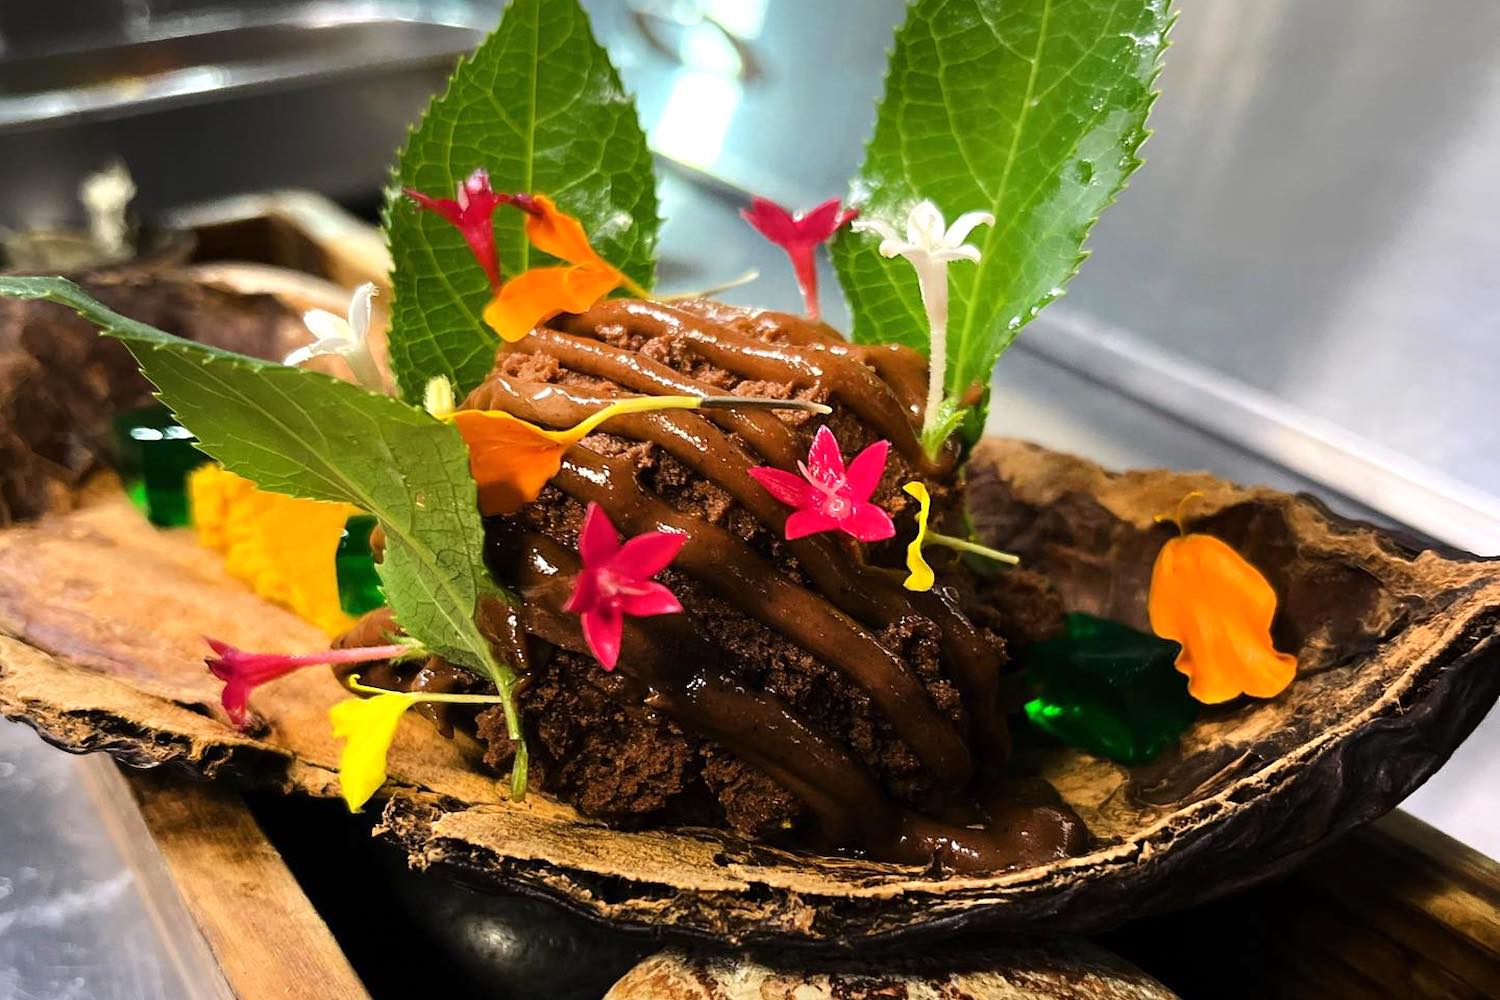 Quillabamba cacao mousse and Lucuma fruit puree, drizzled with spiced chocolate sauce and garnished with burnt Urubamba Eucalyptus at Llama Restaurant.